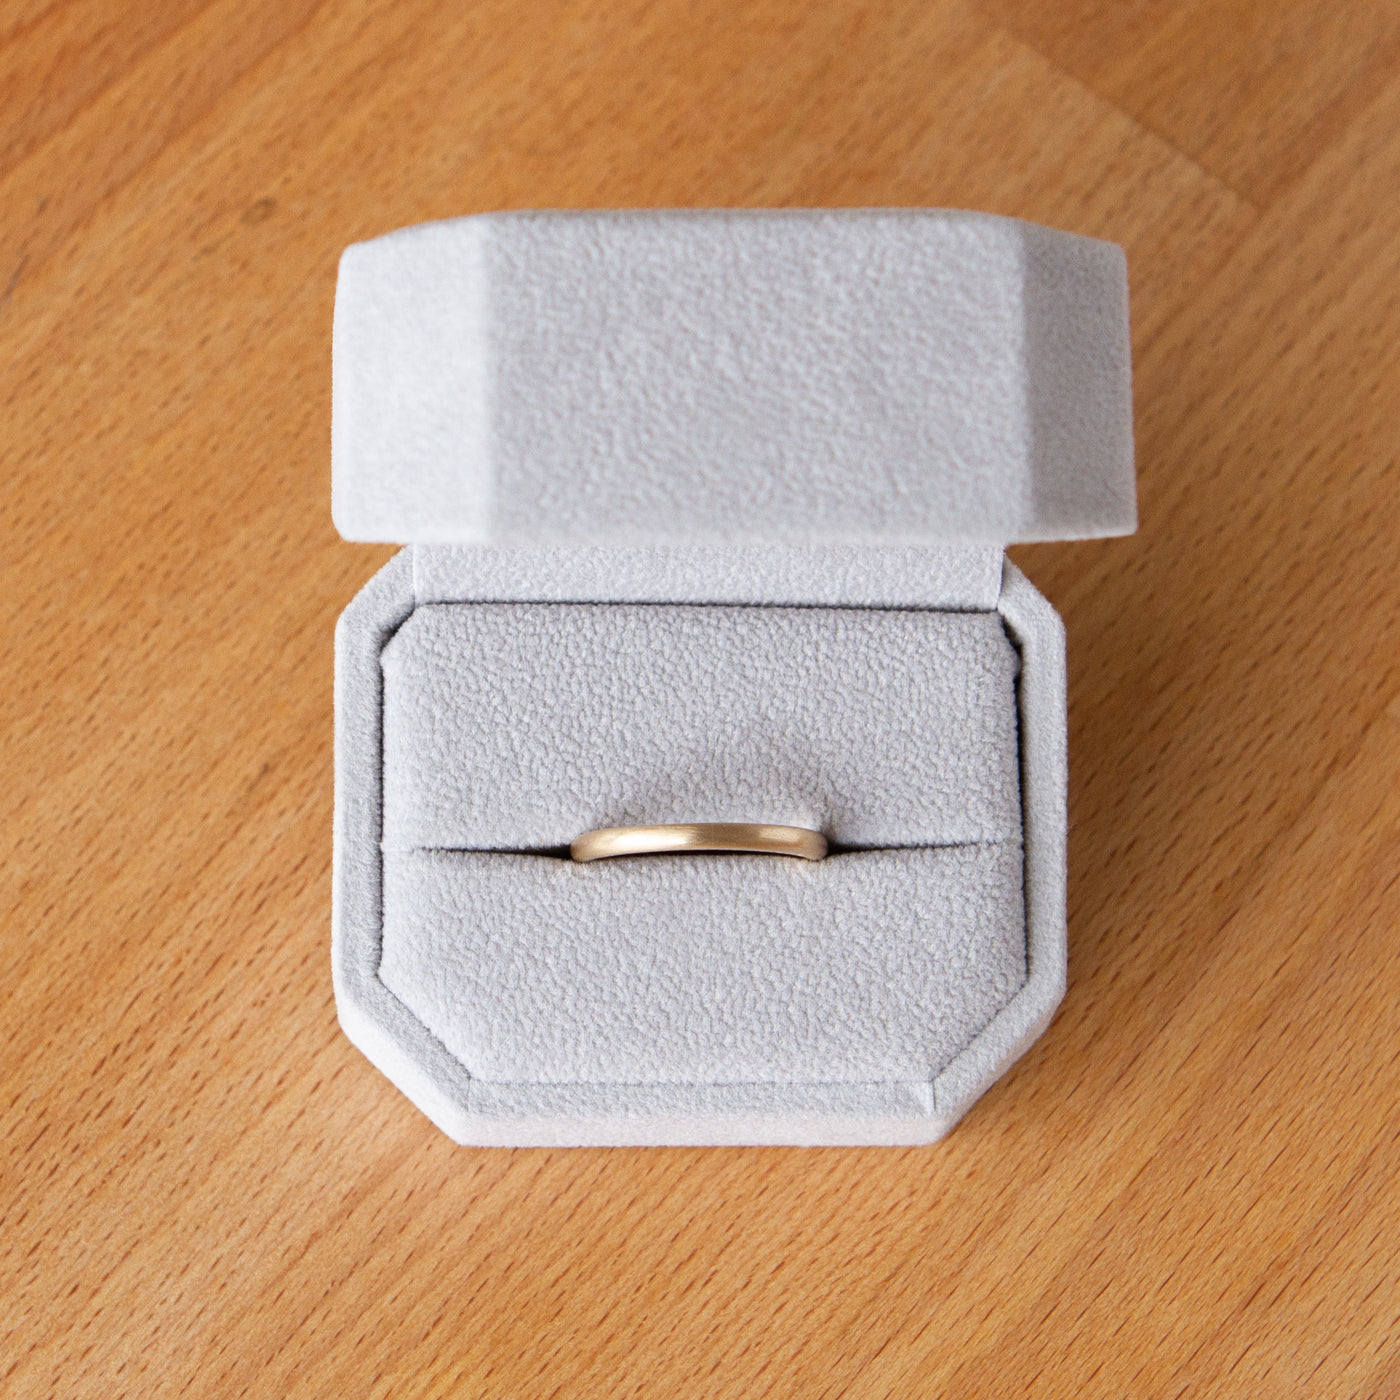 Thin half round Diablo yellow gold brushed wedding band in a ring box